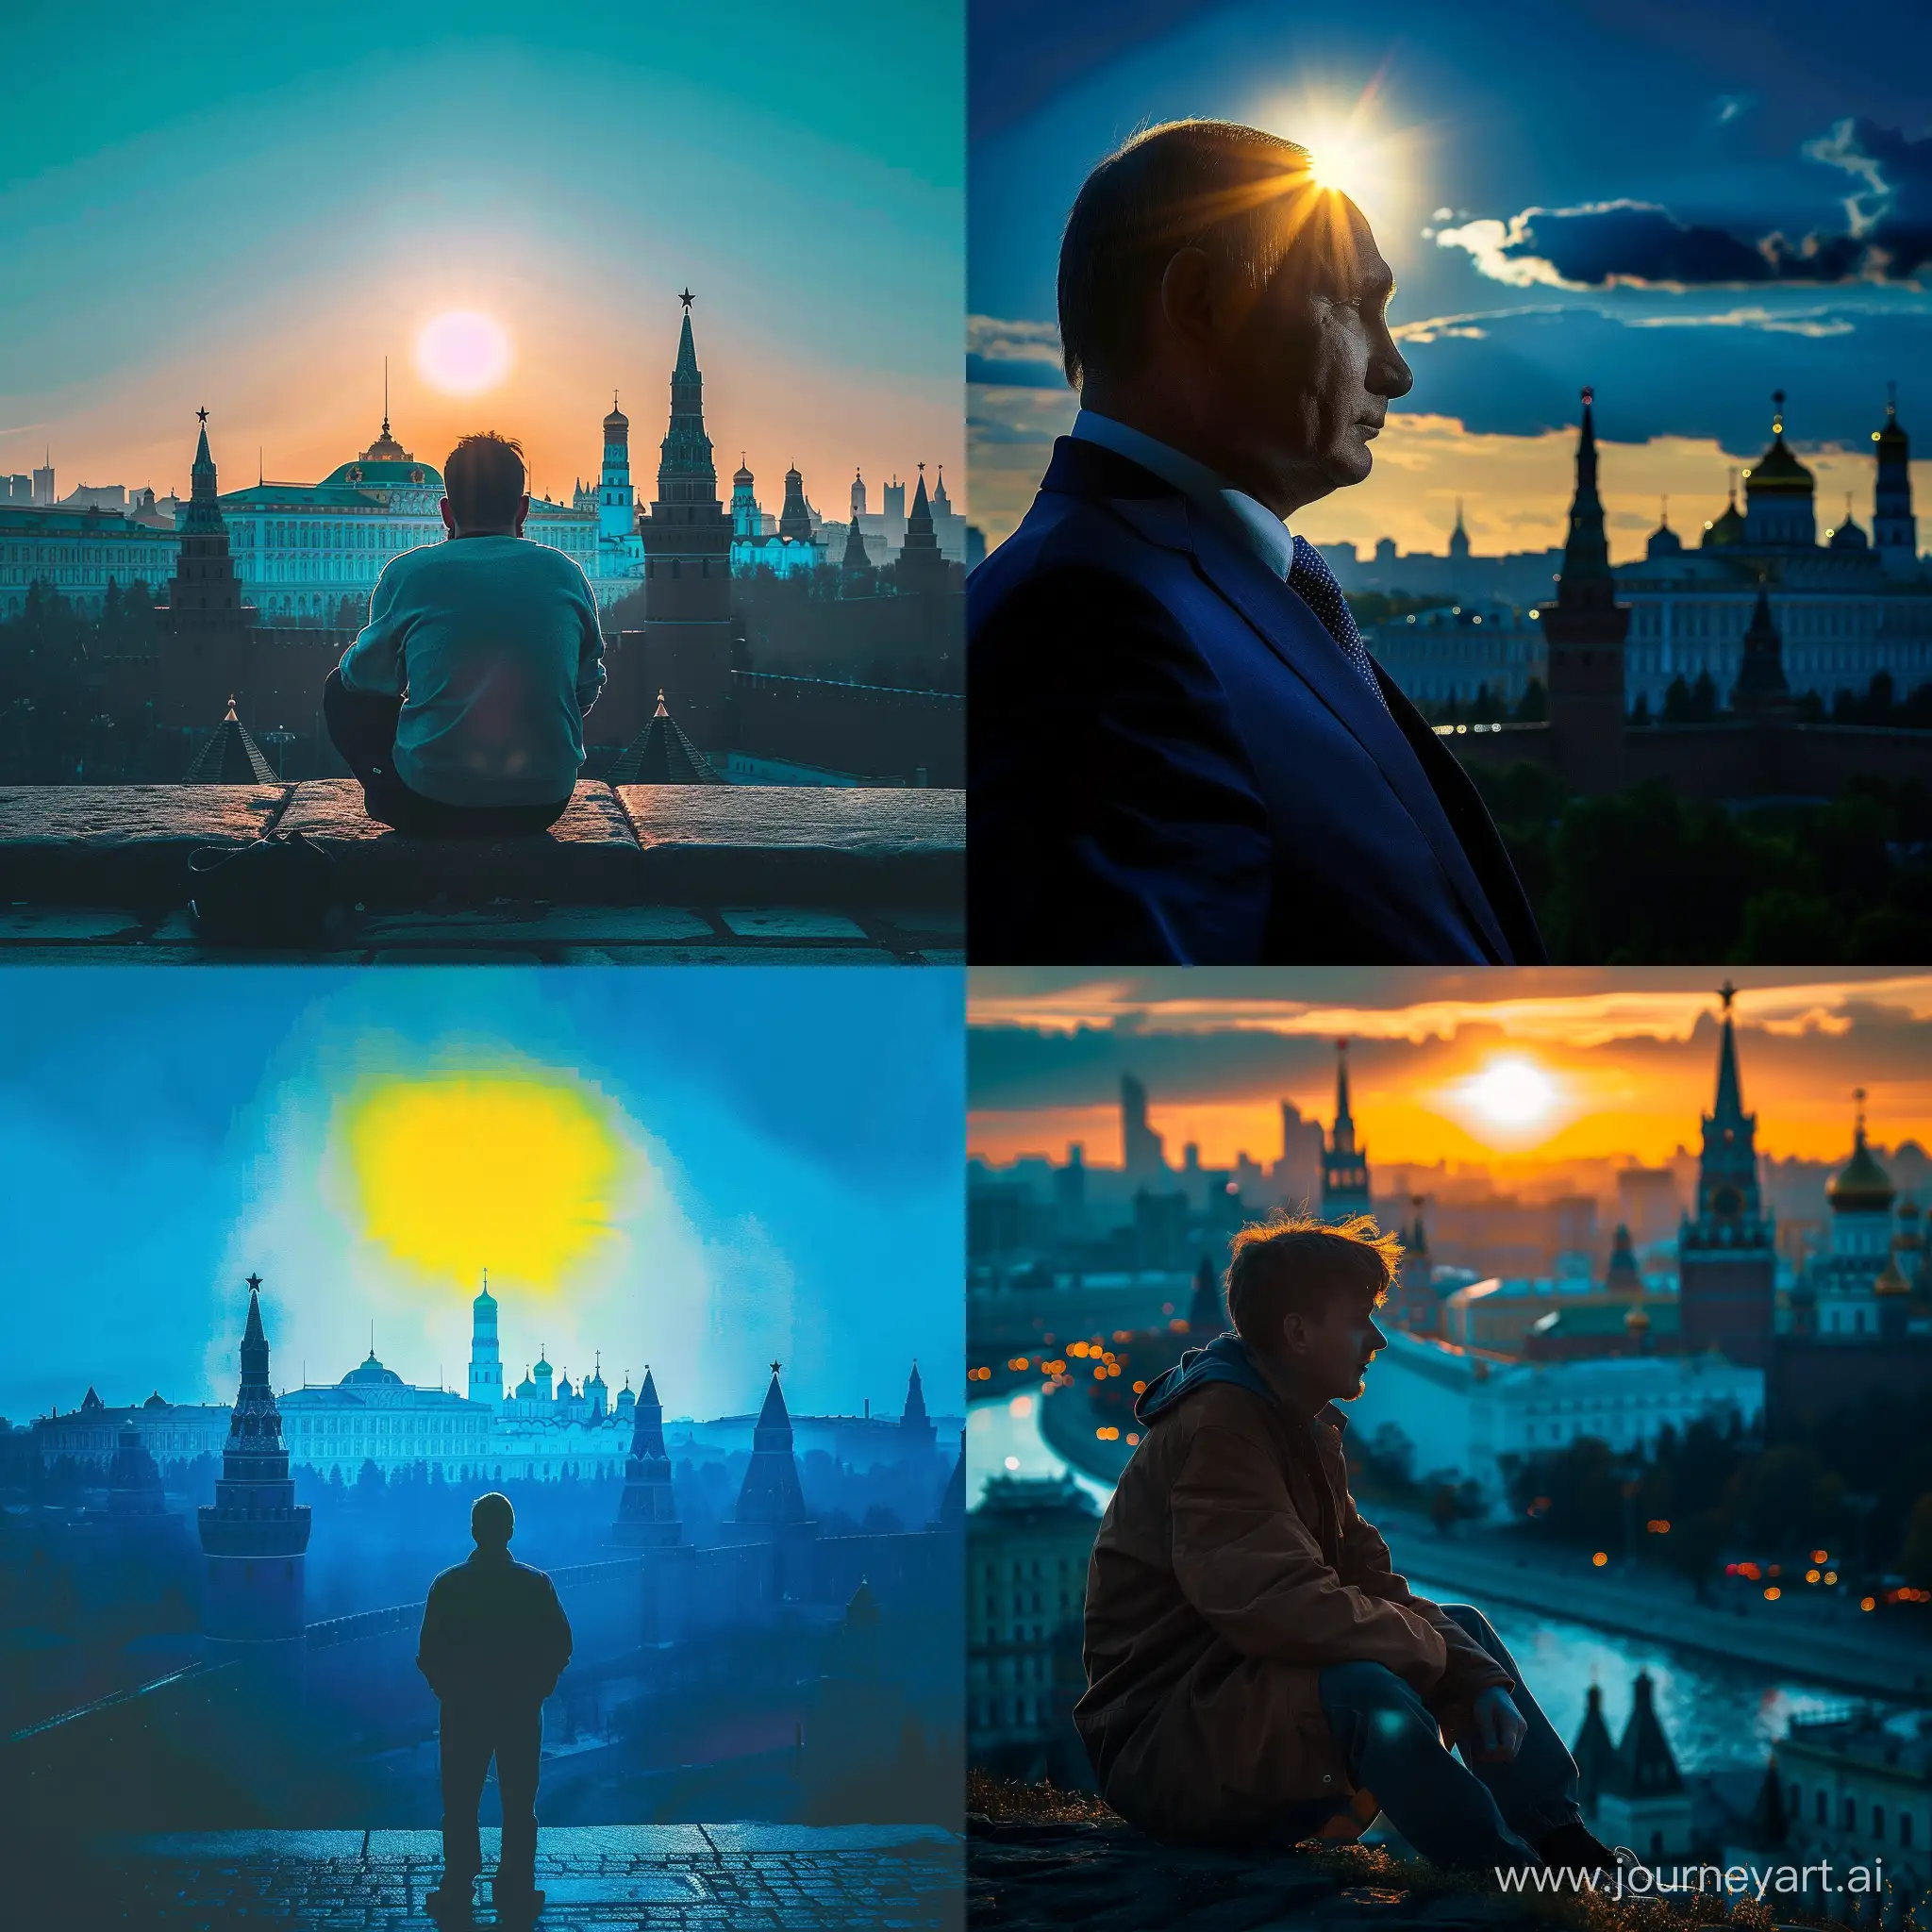 A photo that is somewhat closer to the truth of the Kremlin and Moscow behind him in blue and the sun yellow 